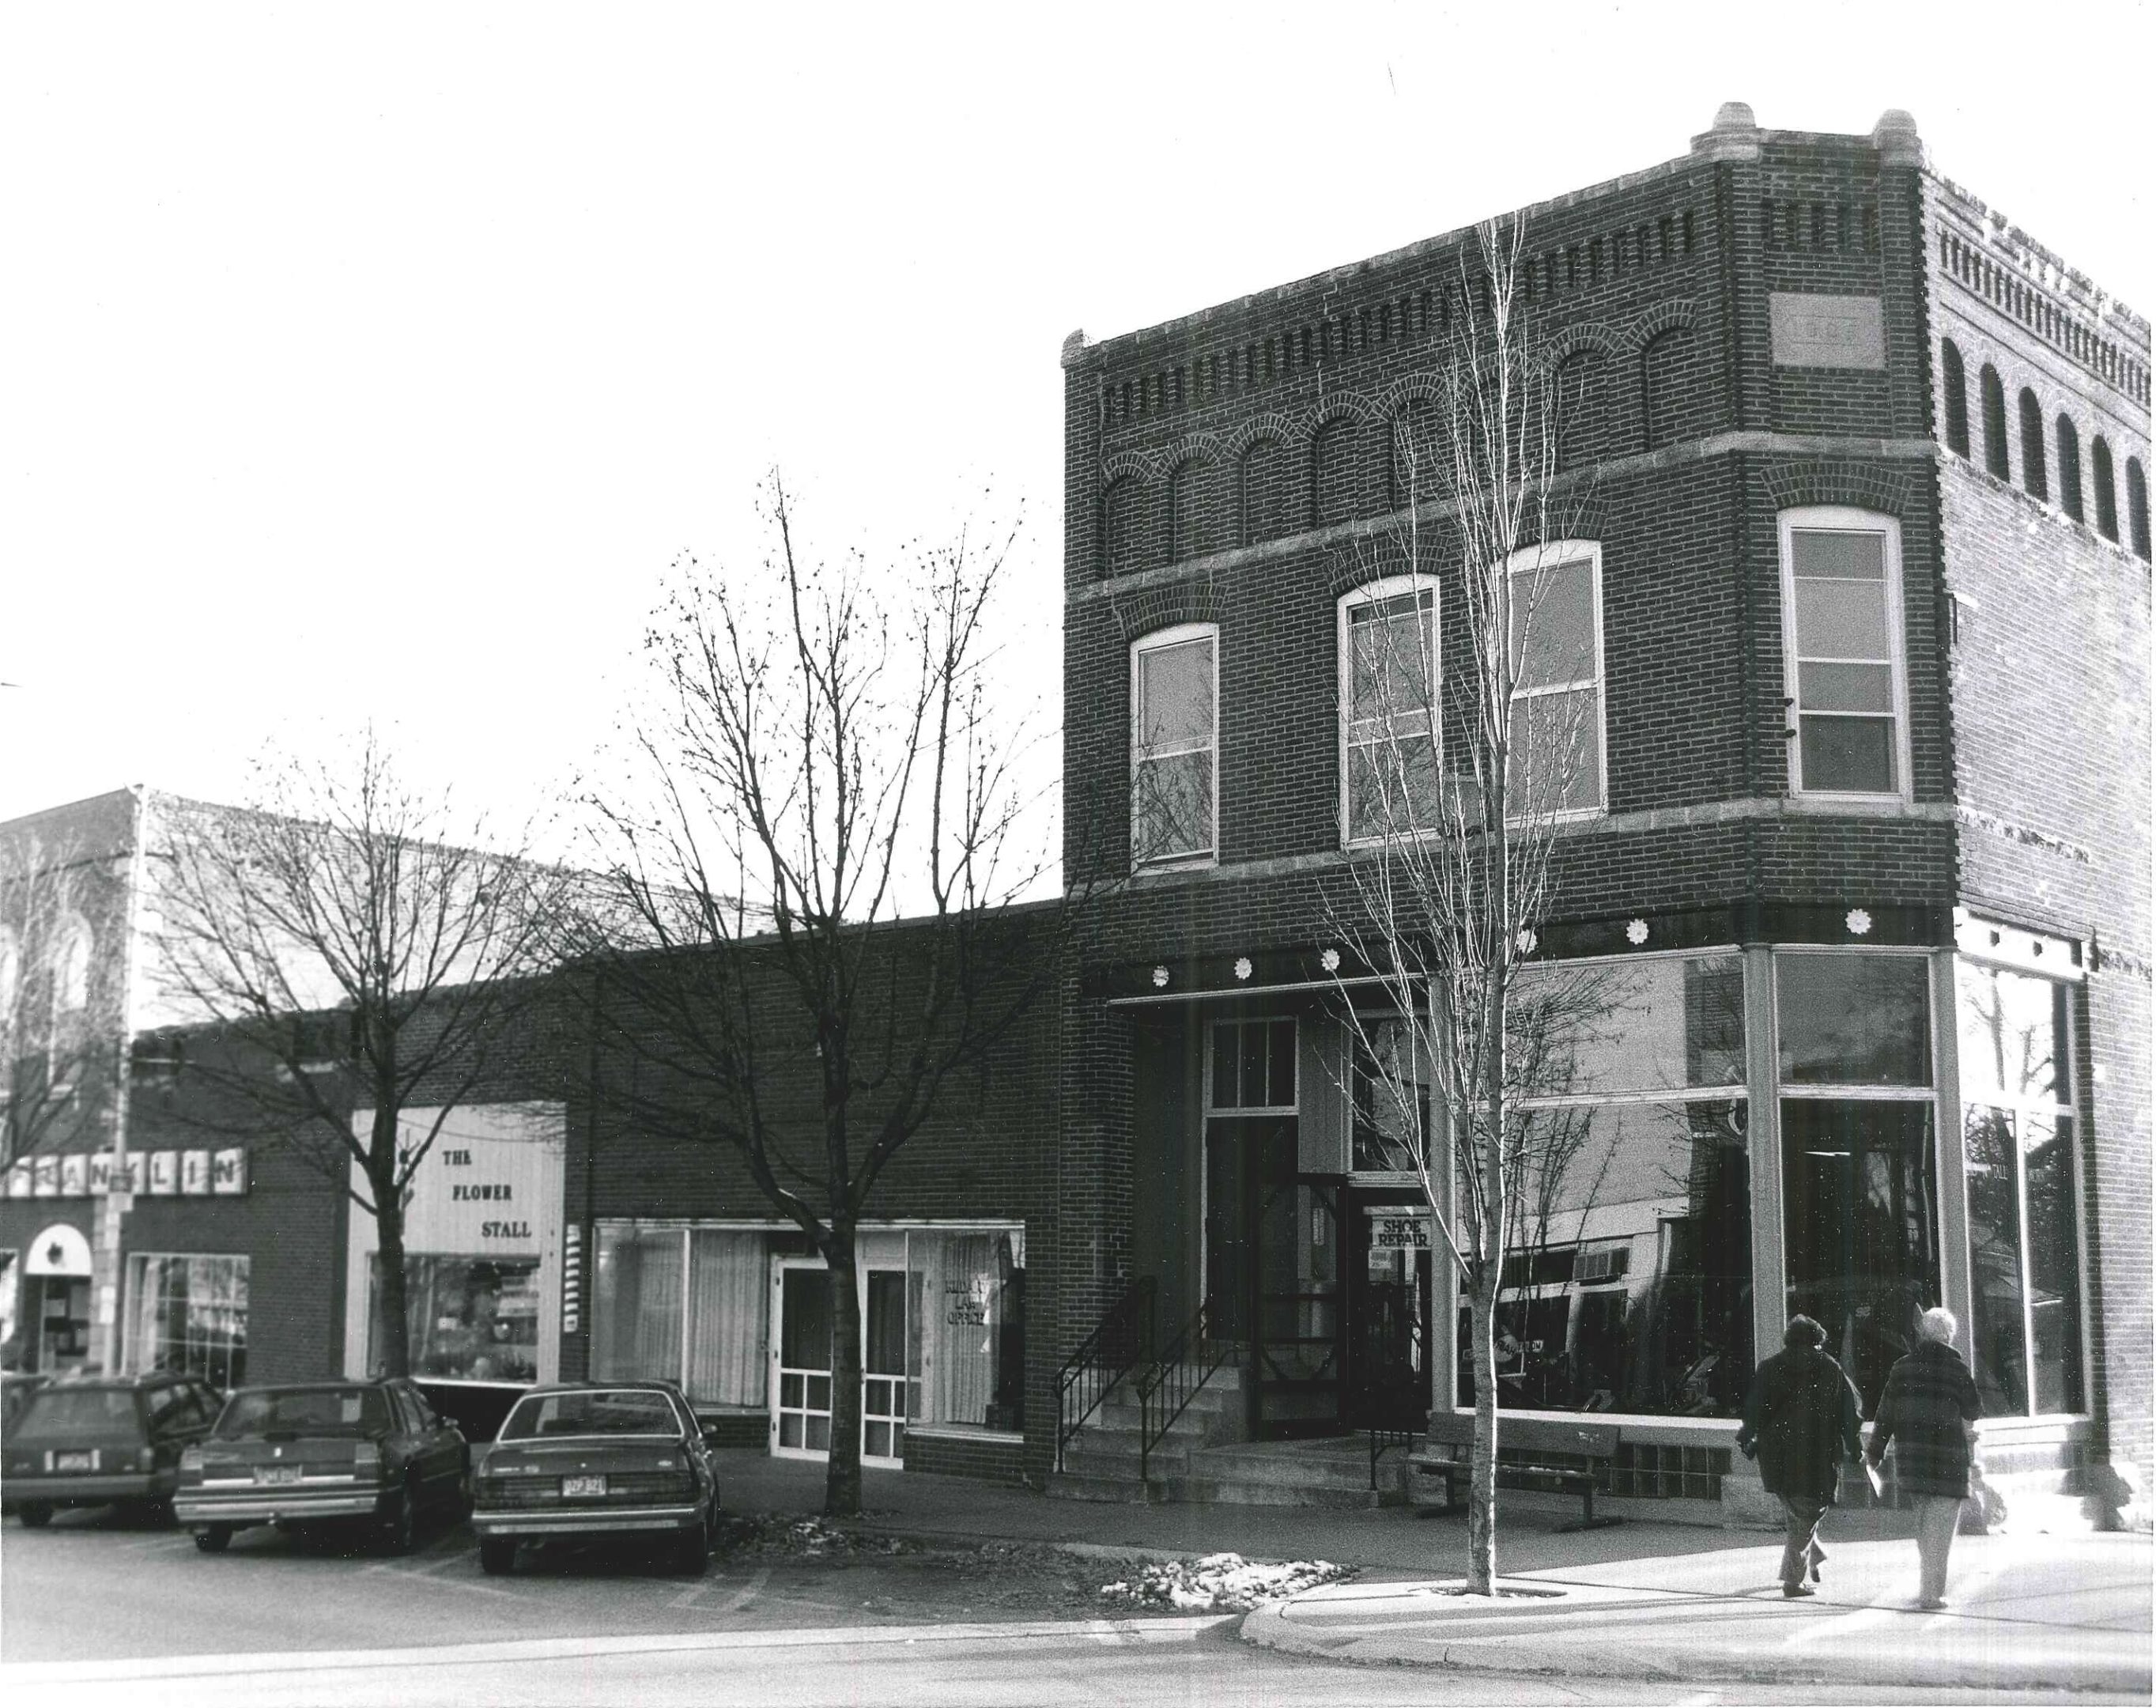 Photo of buildings on South side of First Street W. Photographed 1990 by Barbara Beving Long.